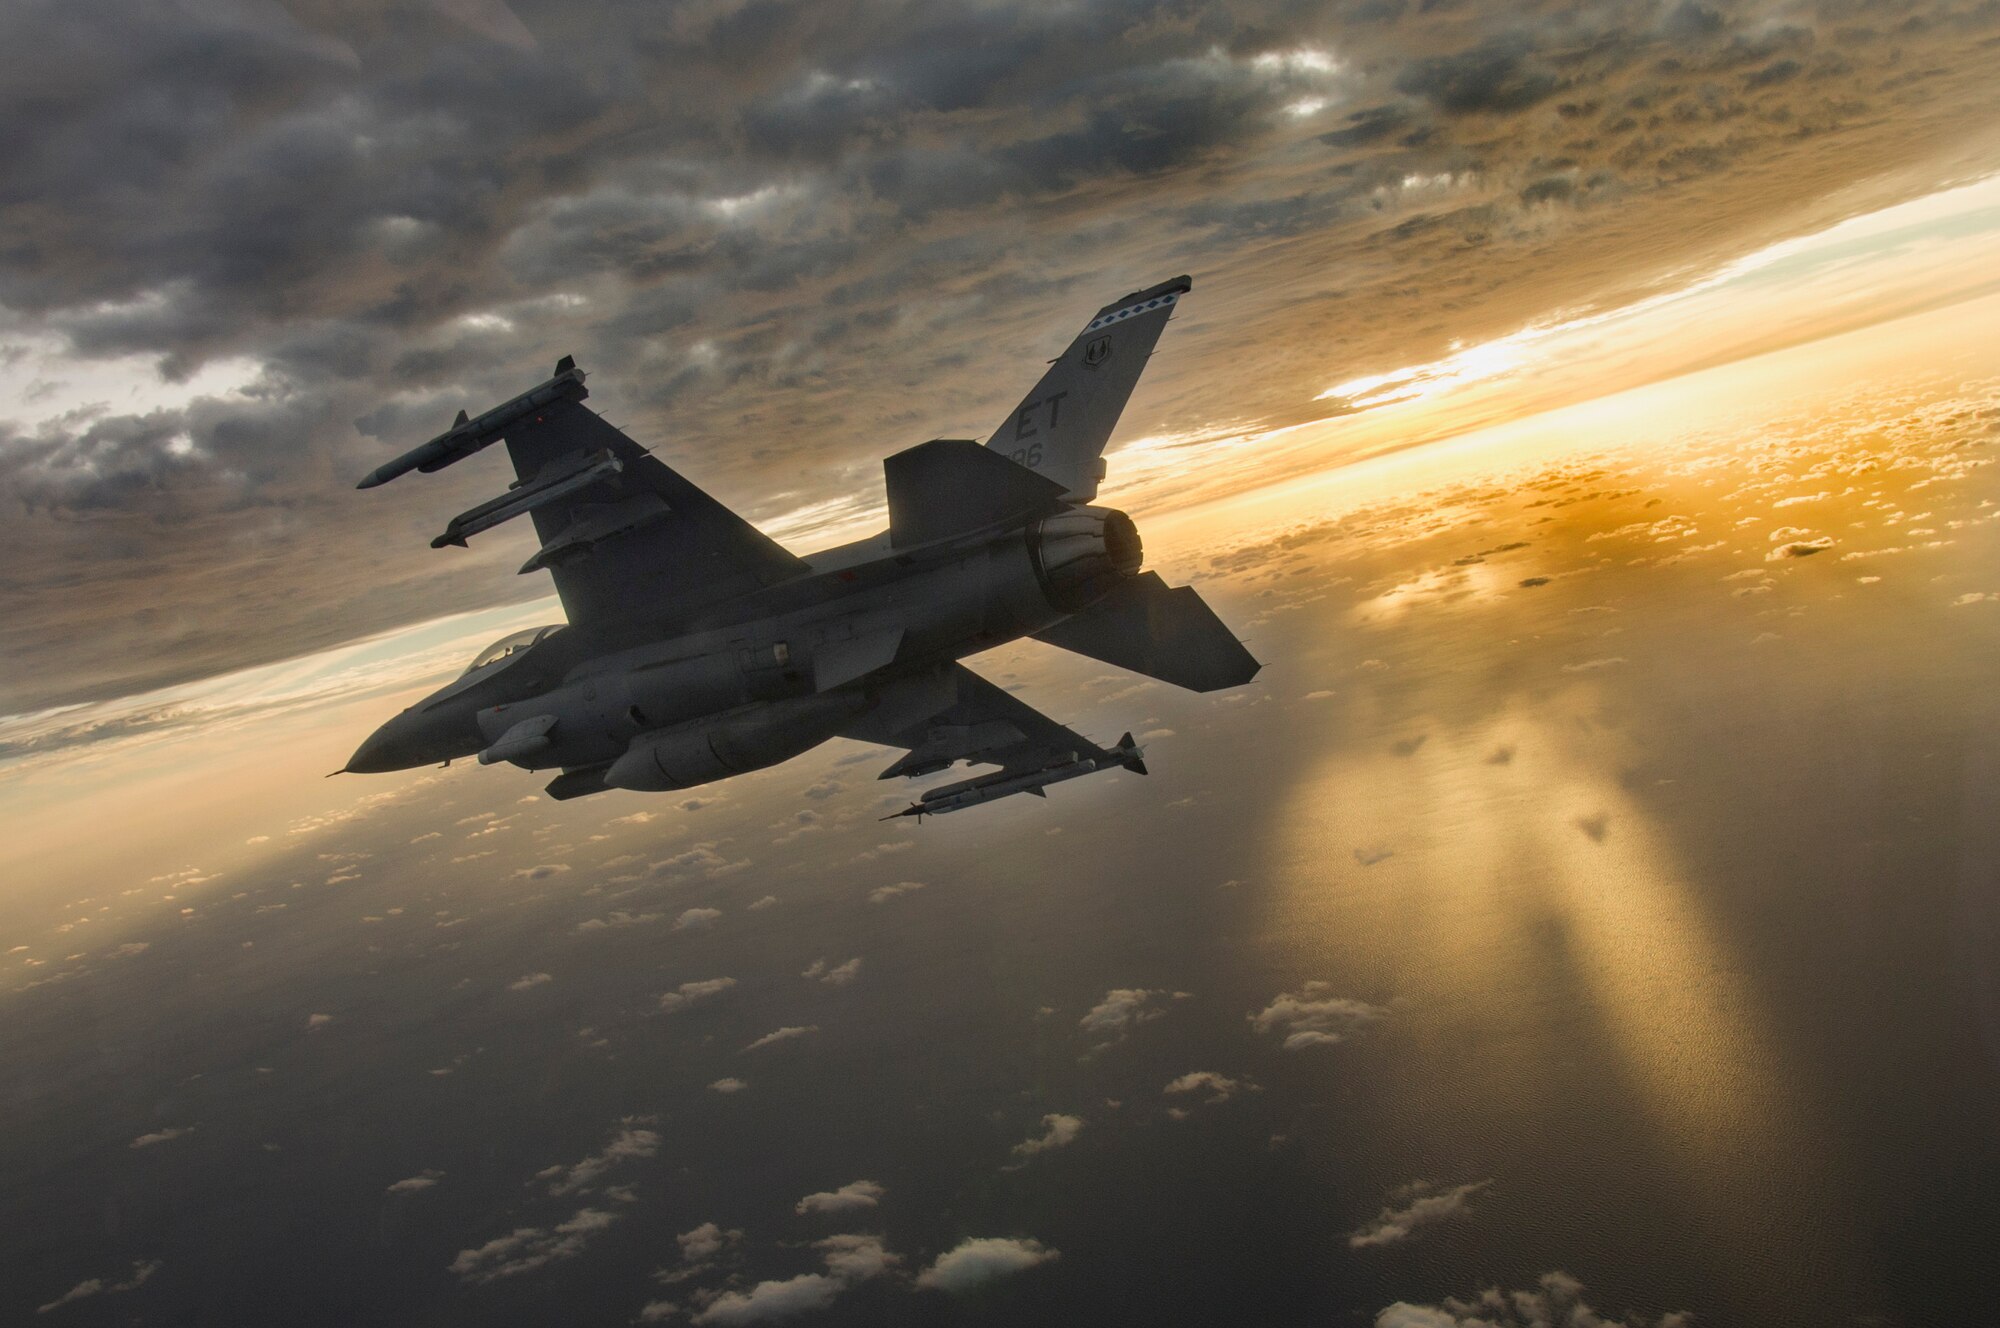 A F-16 Fighting Falcon flies during a mission at Eglin Air Force Base, Florida in Feb. 2019. (U.S. Air Force photo by Tech. Sgt. John Raven)